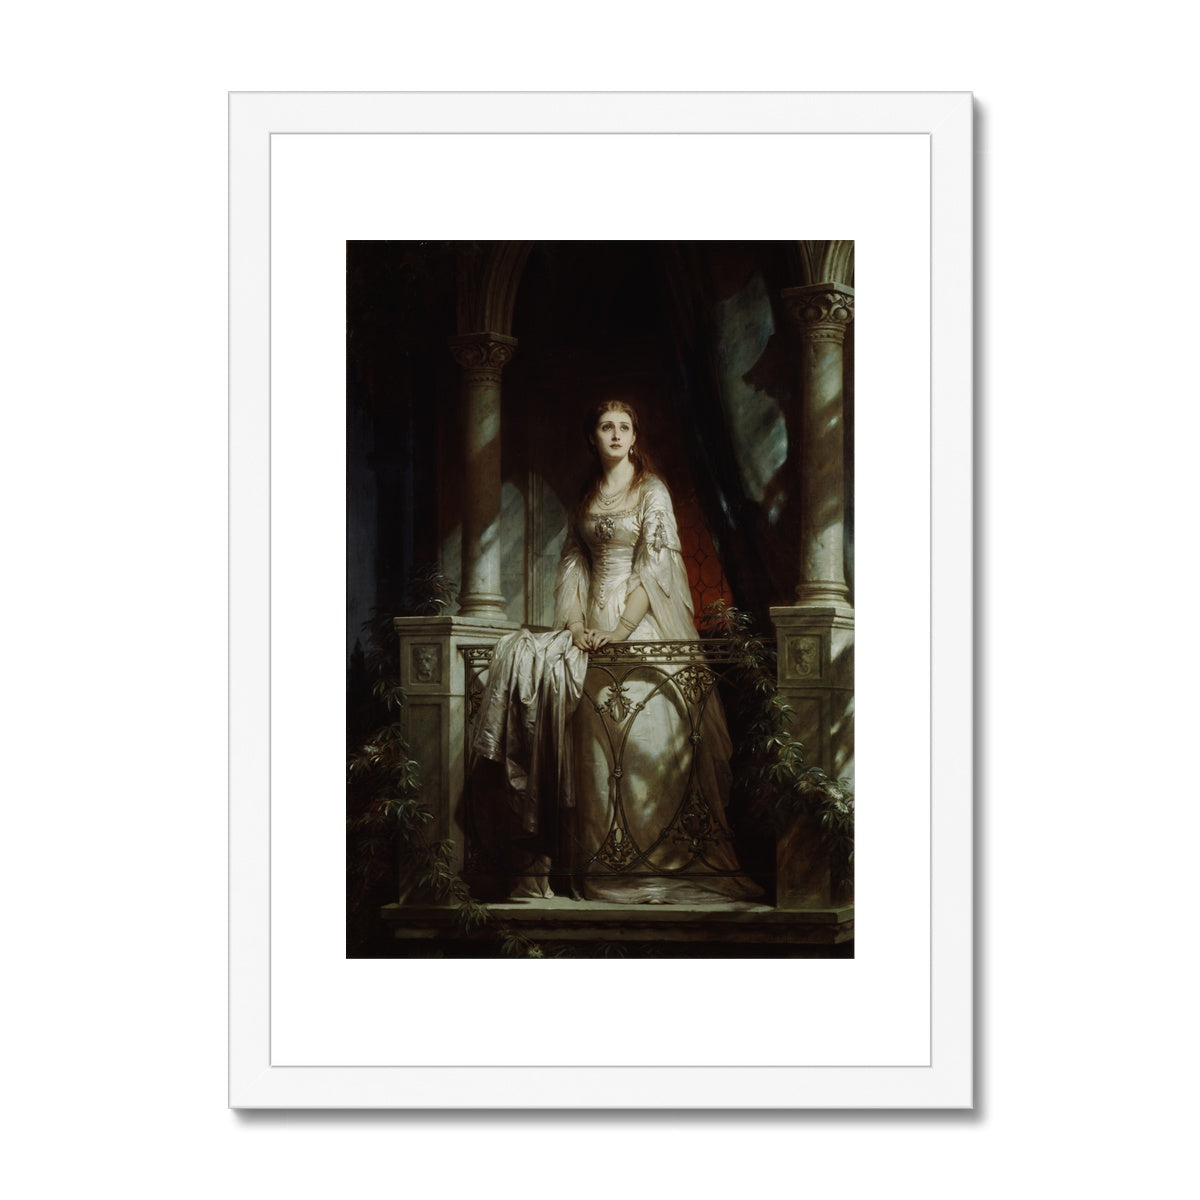 Fine Art Print Framed & Mounted - Juliet by Thomas Francis Dicksee